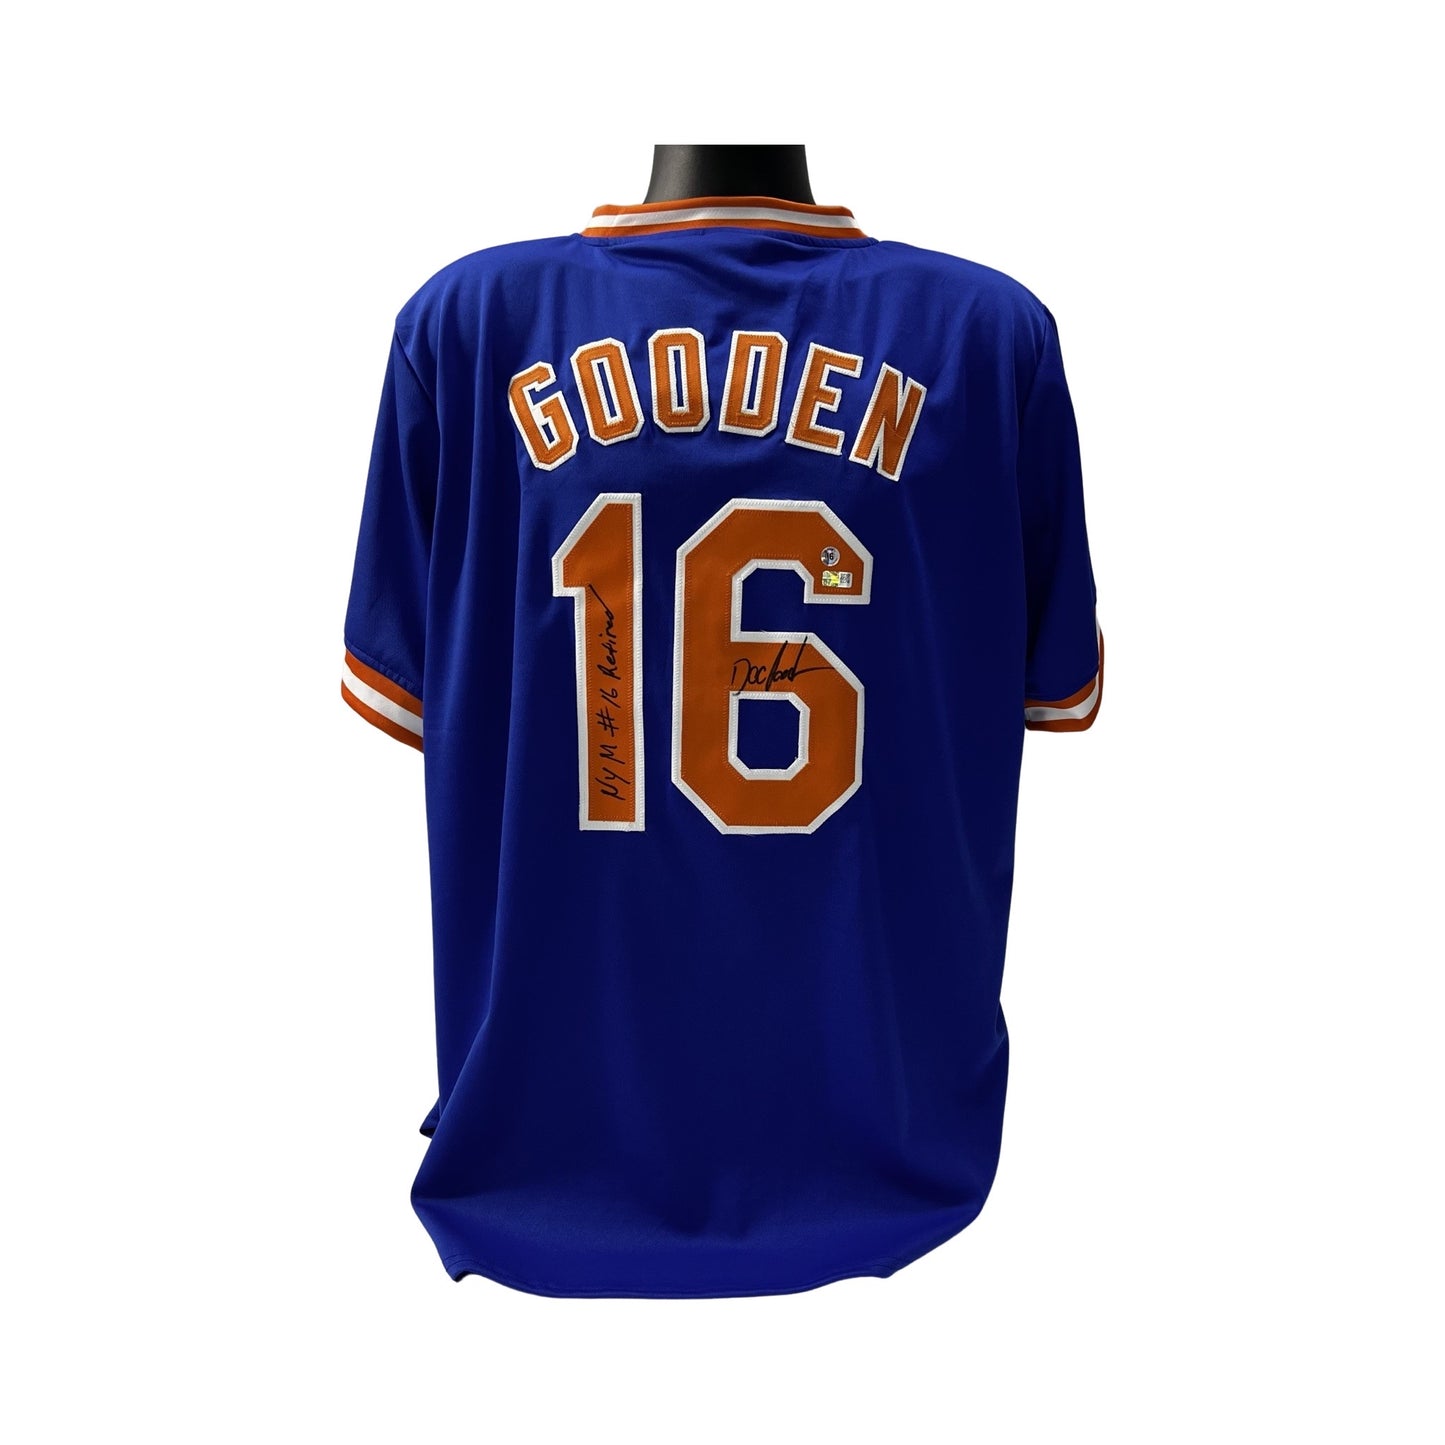 Doc Gooden Autographed New York Mets Blue Jersey "NYM #16 Retired" Inscription Steiner CX / Doctor K Authenticated